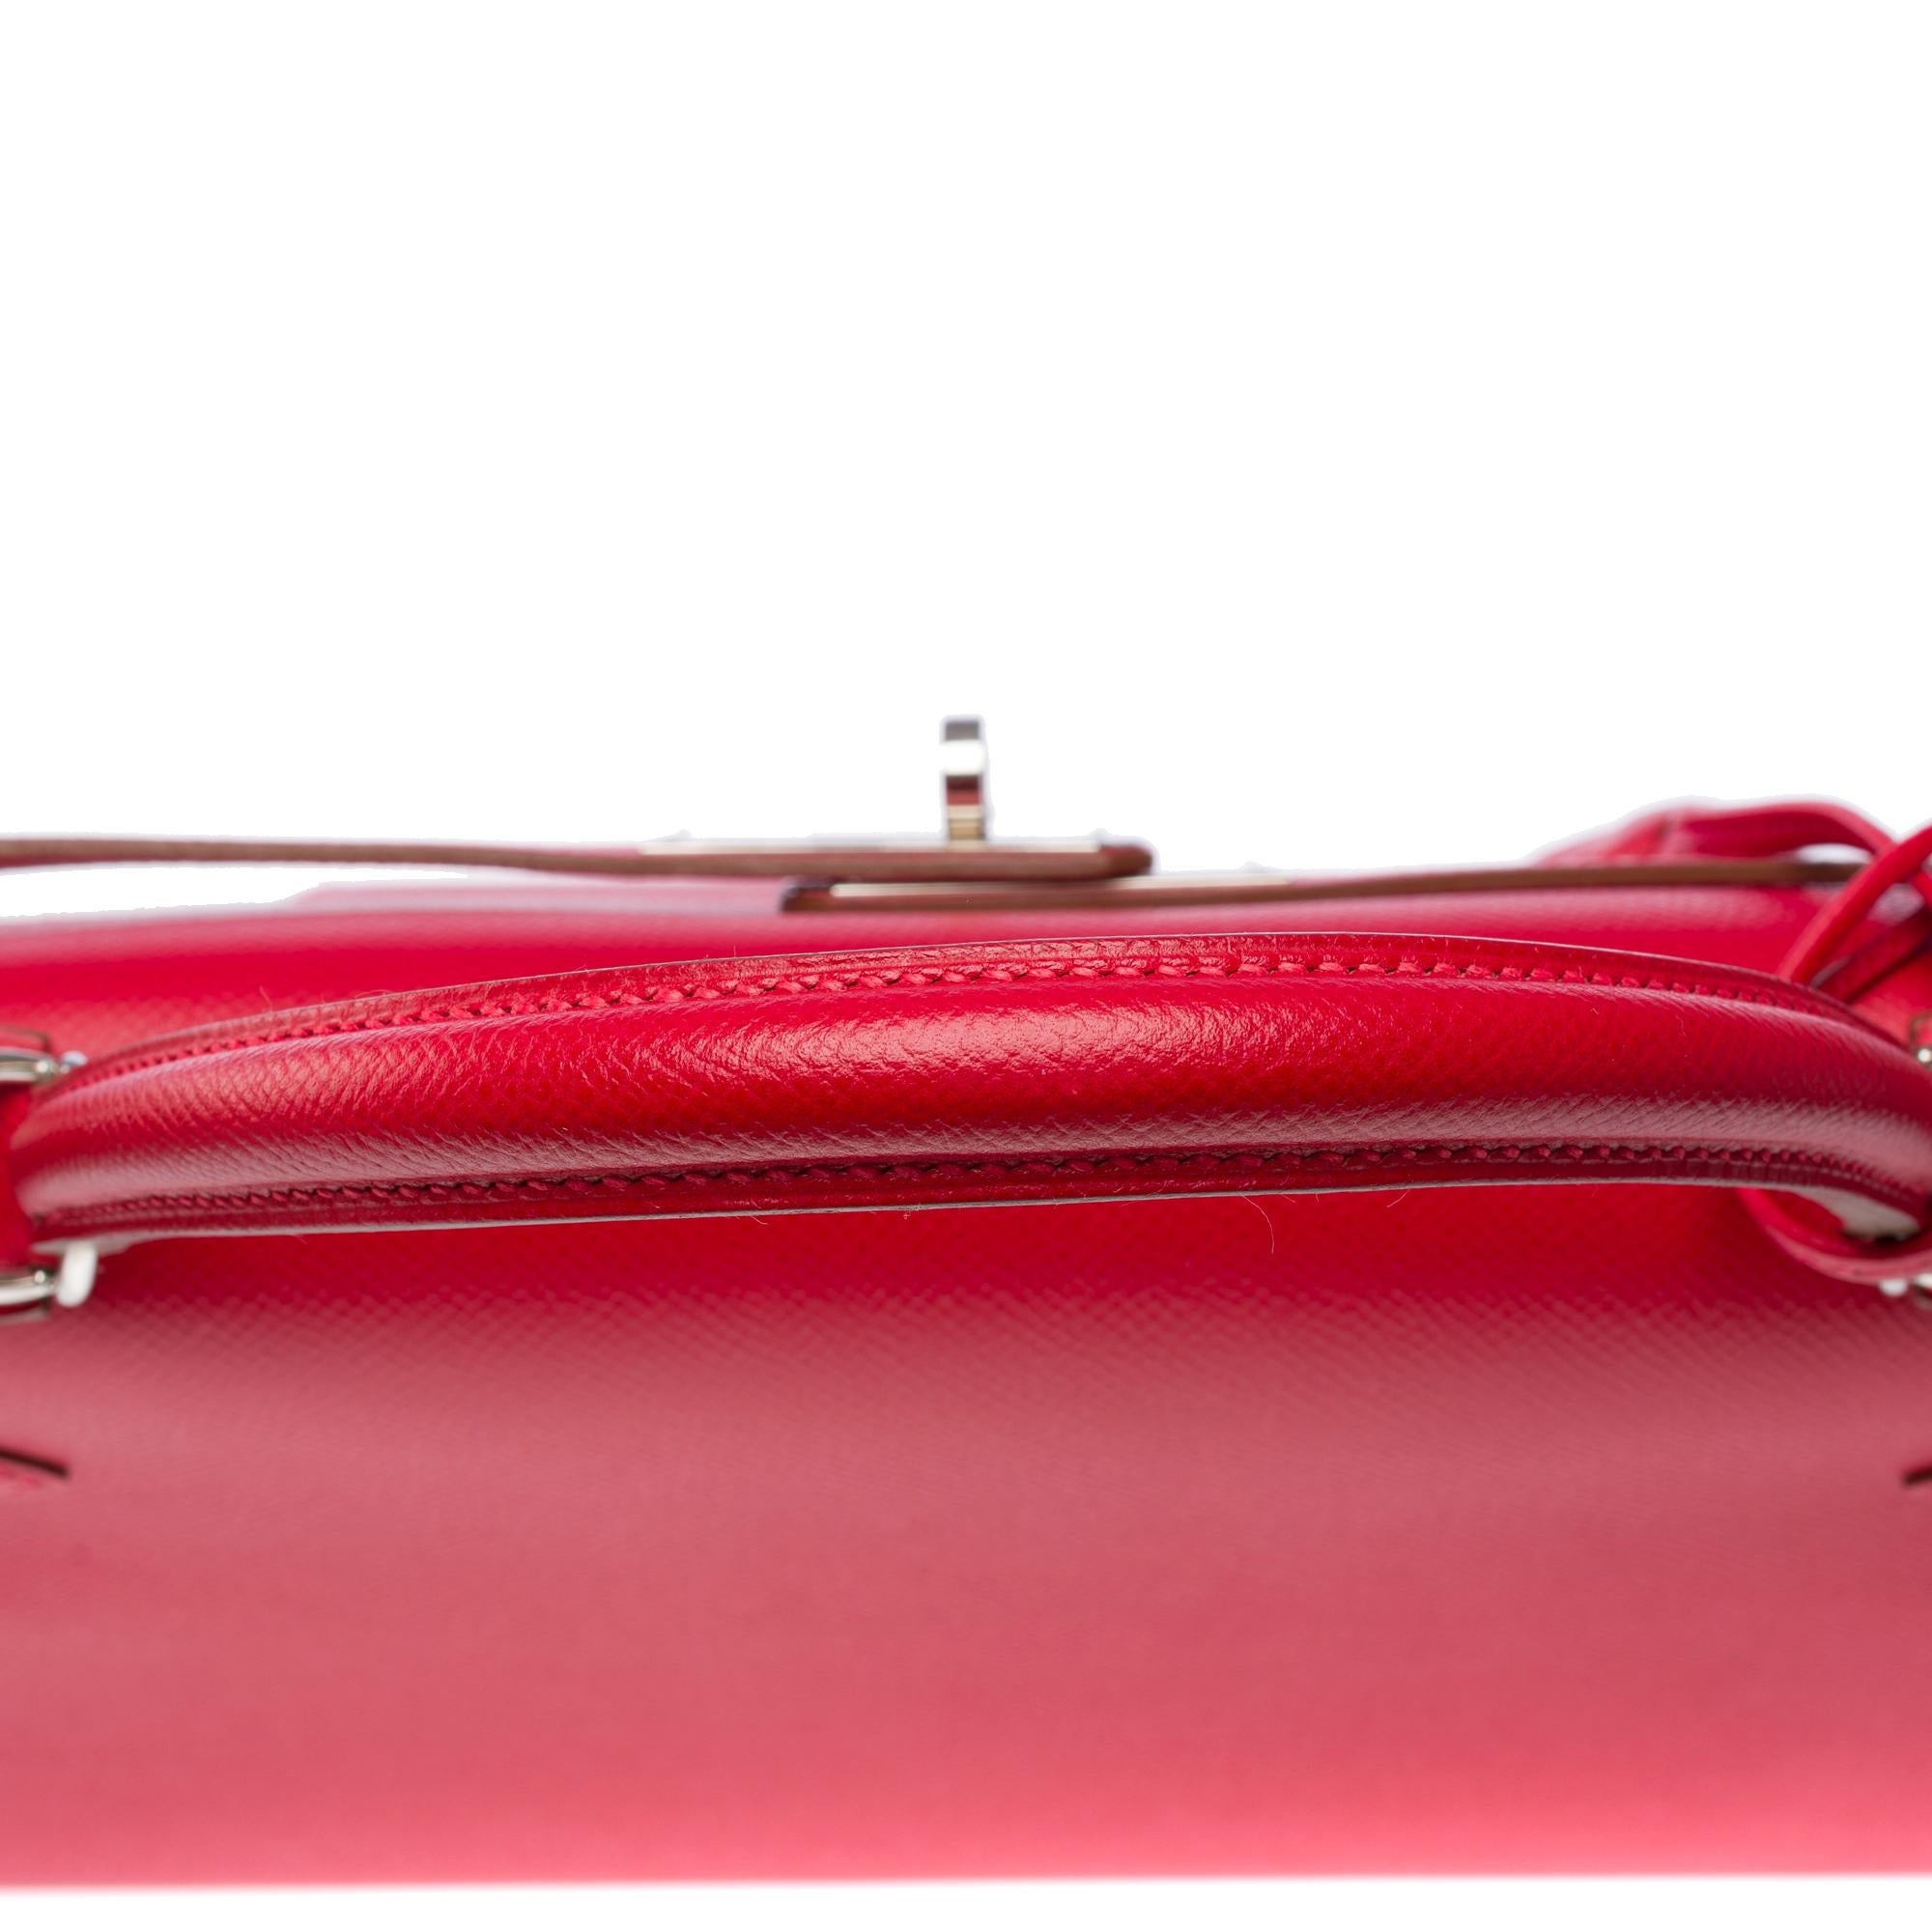 Flag limited edition Hermès Kelly 32  handbag strap in red and white epsom, PHW 5